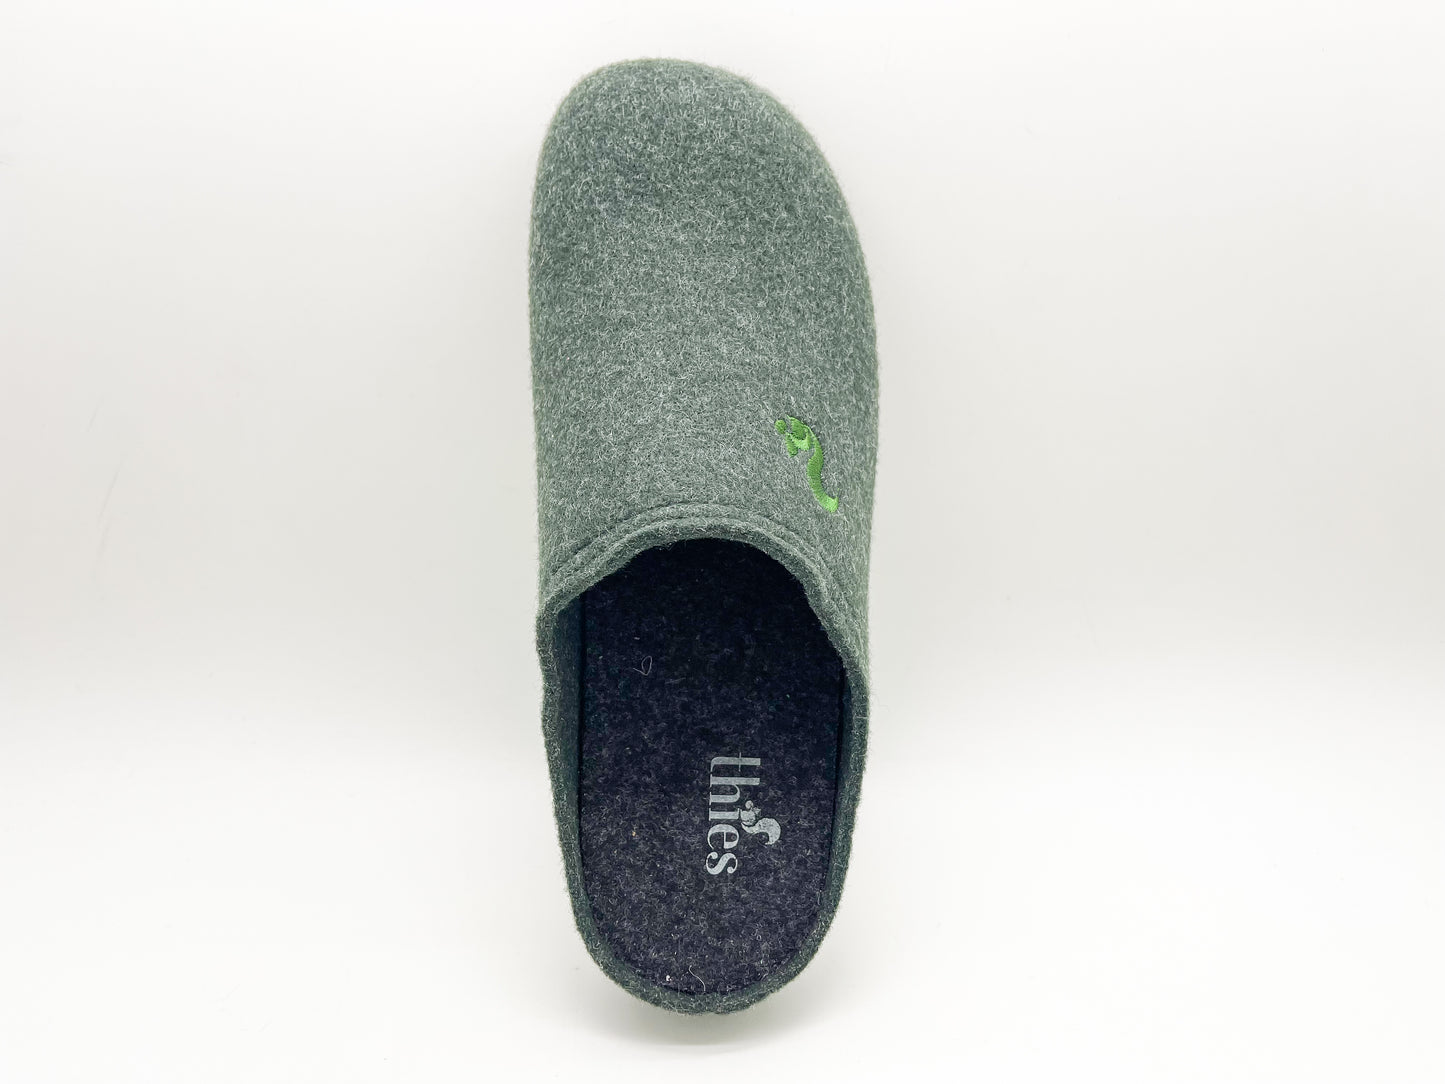 thies 1856 ® Recycled PET Slipper vegan forest green (W/M/X)